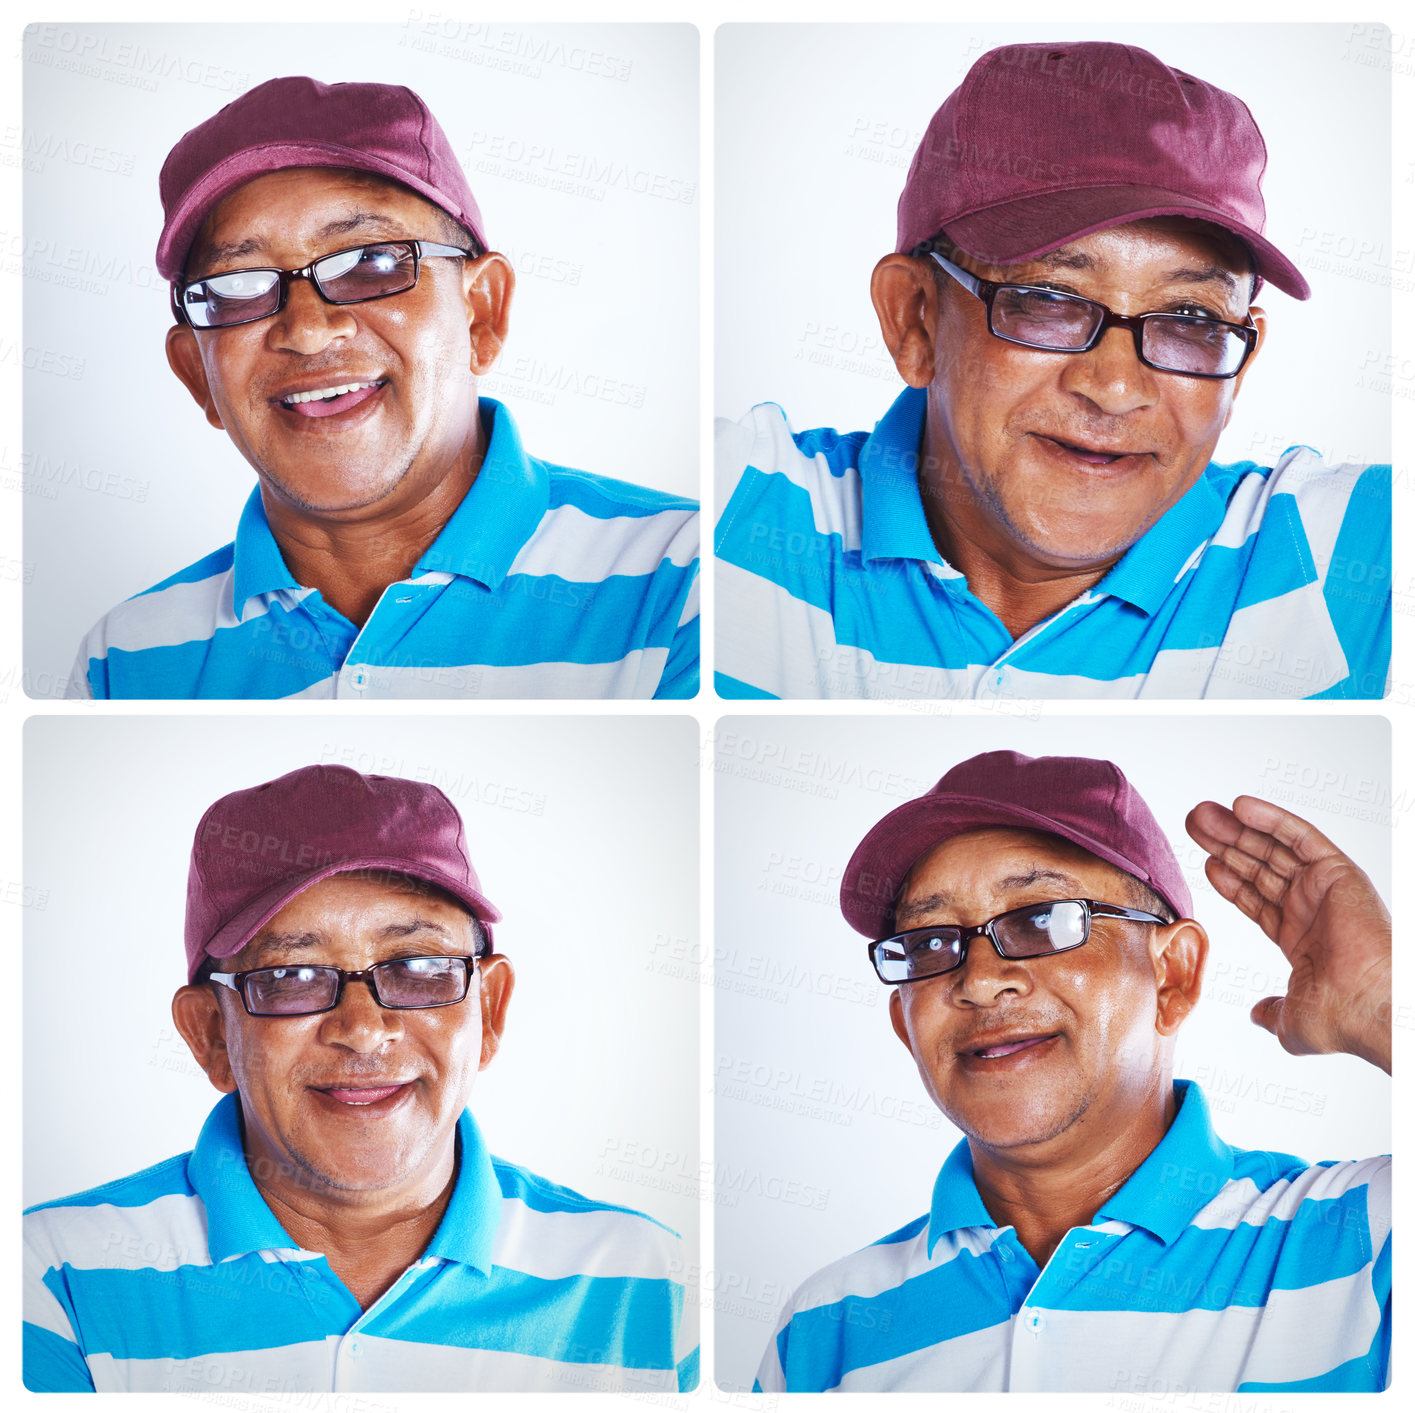 Buy stock photo Mature man, portrait and collage with faces in casual fashion, clothing or personality on montage. Male person with smile, cap or glasses in collection, frame or series of emotions or expressions